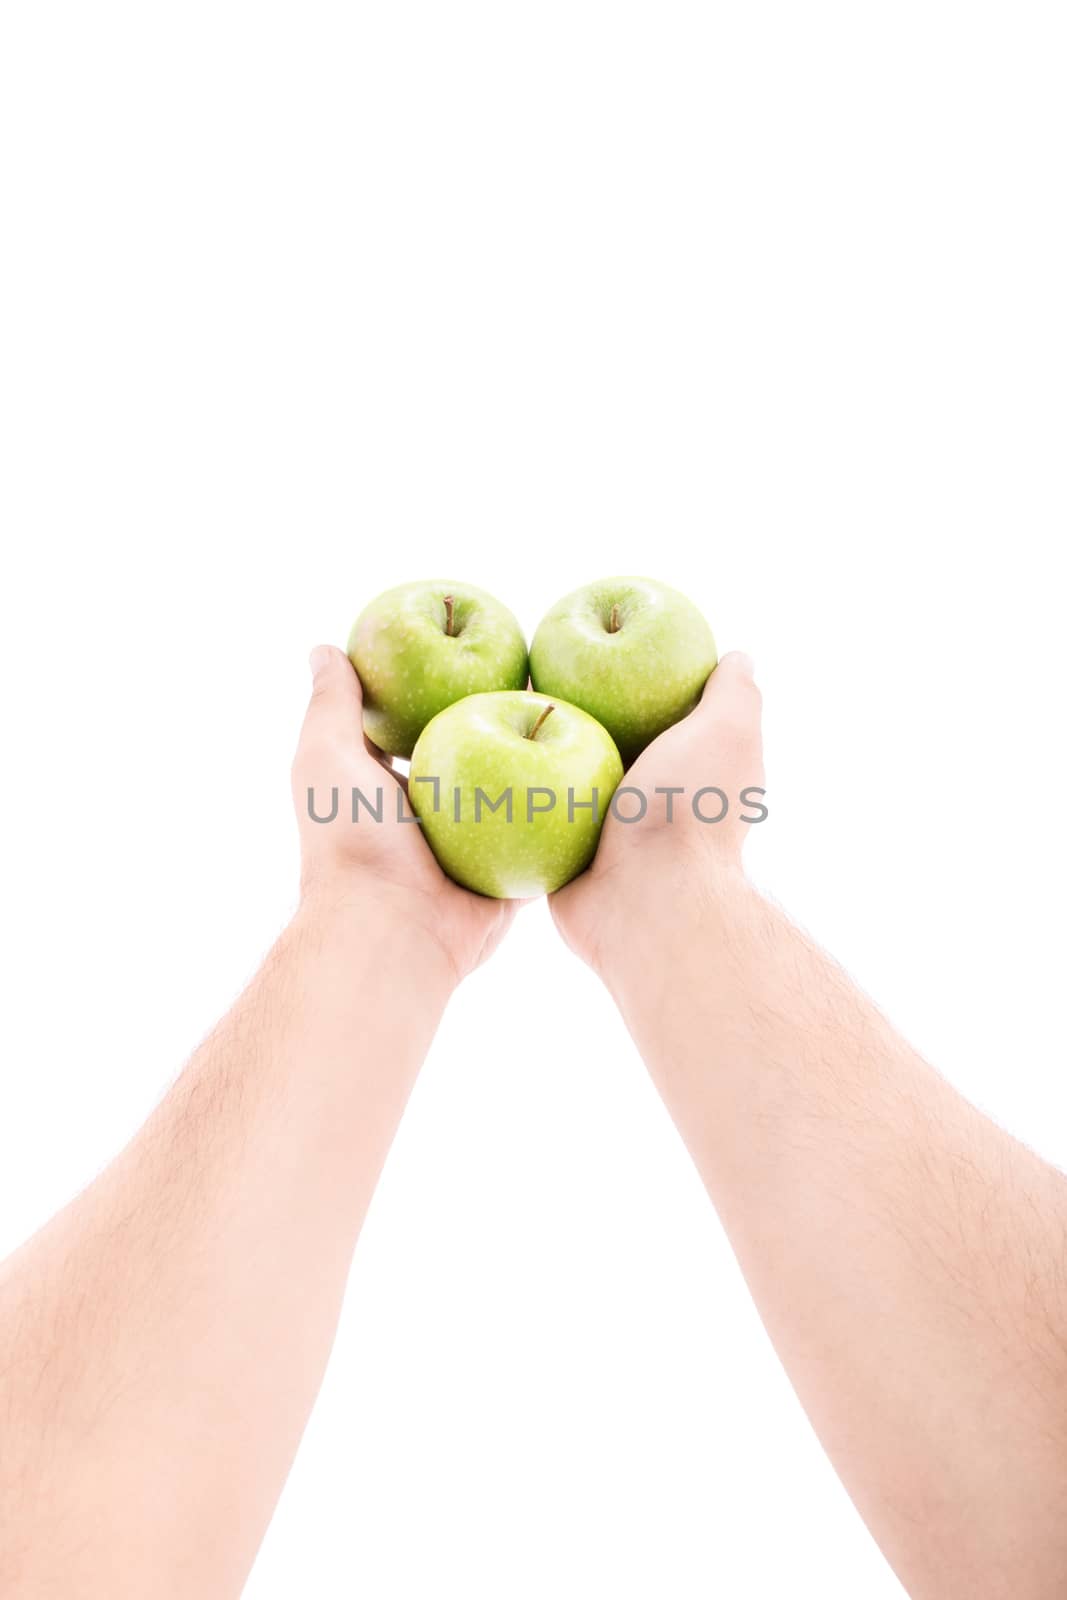 Stretched out male hands offering green apples, isolated on white background.